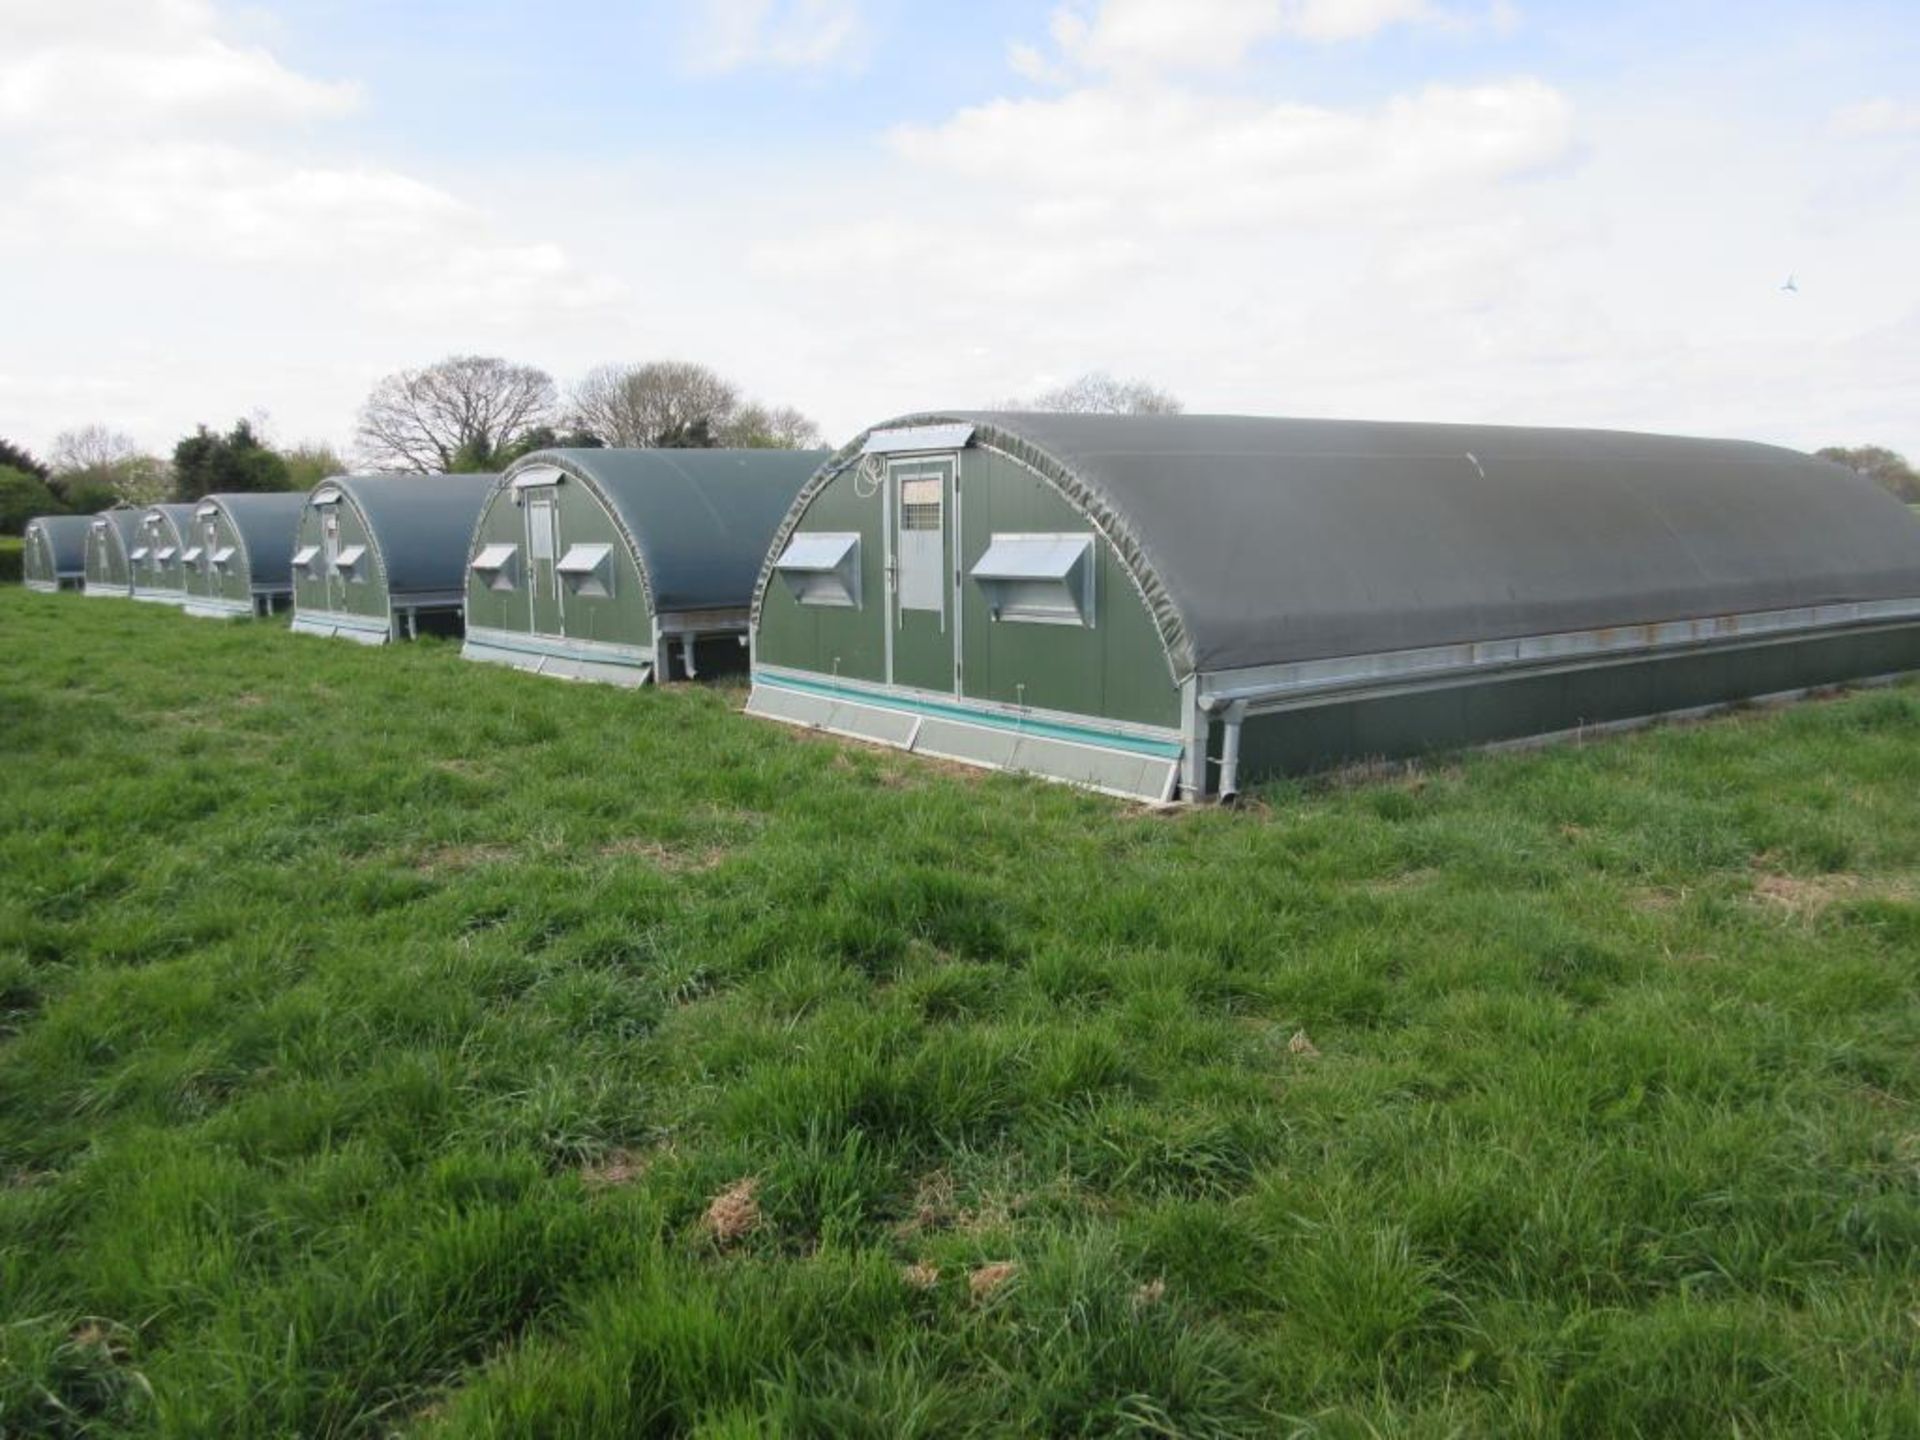 Halo Mini-Ranger sheds; 6no 10m x5m mobile rearing sheds. Purchased 2009.2010 and last used in